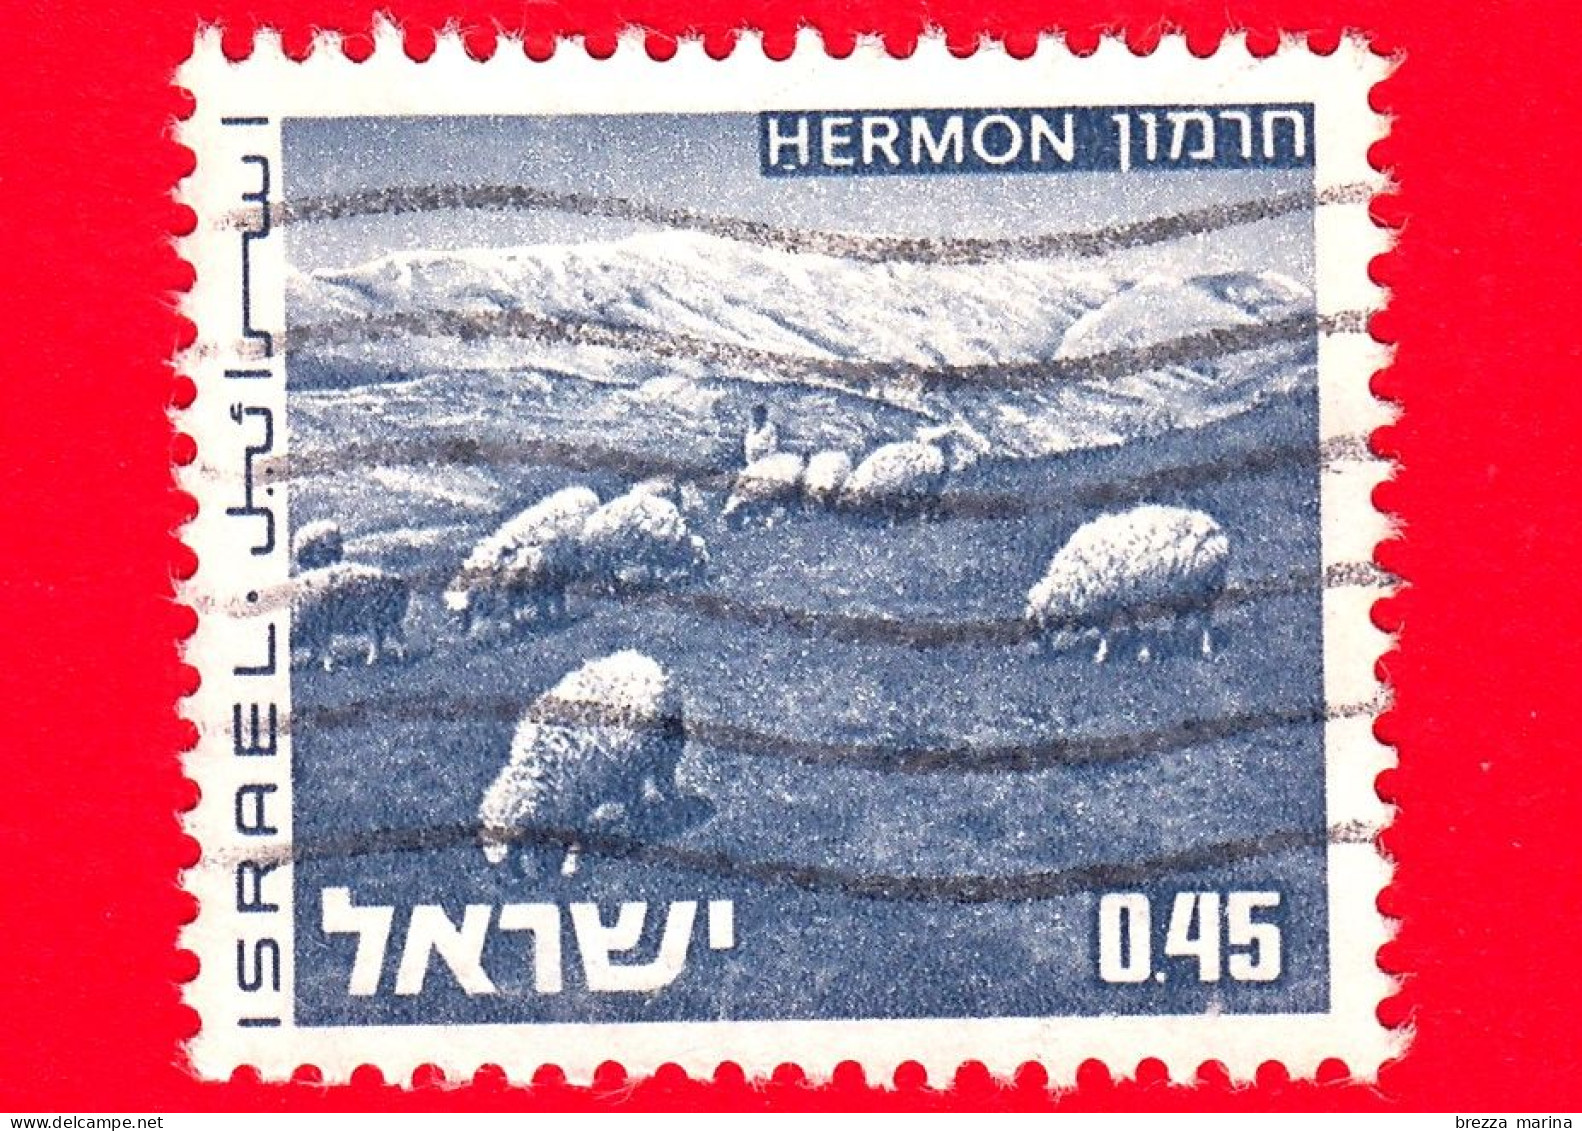 ISRAELE - Usato - 1973 - Paesaggi - Landscapes Of Israel - Monte Hermon - Pecore - 0.45 - Used Stamps (without Tabs)